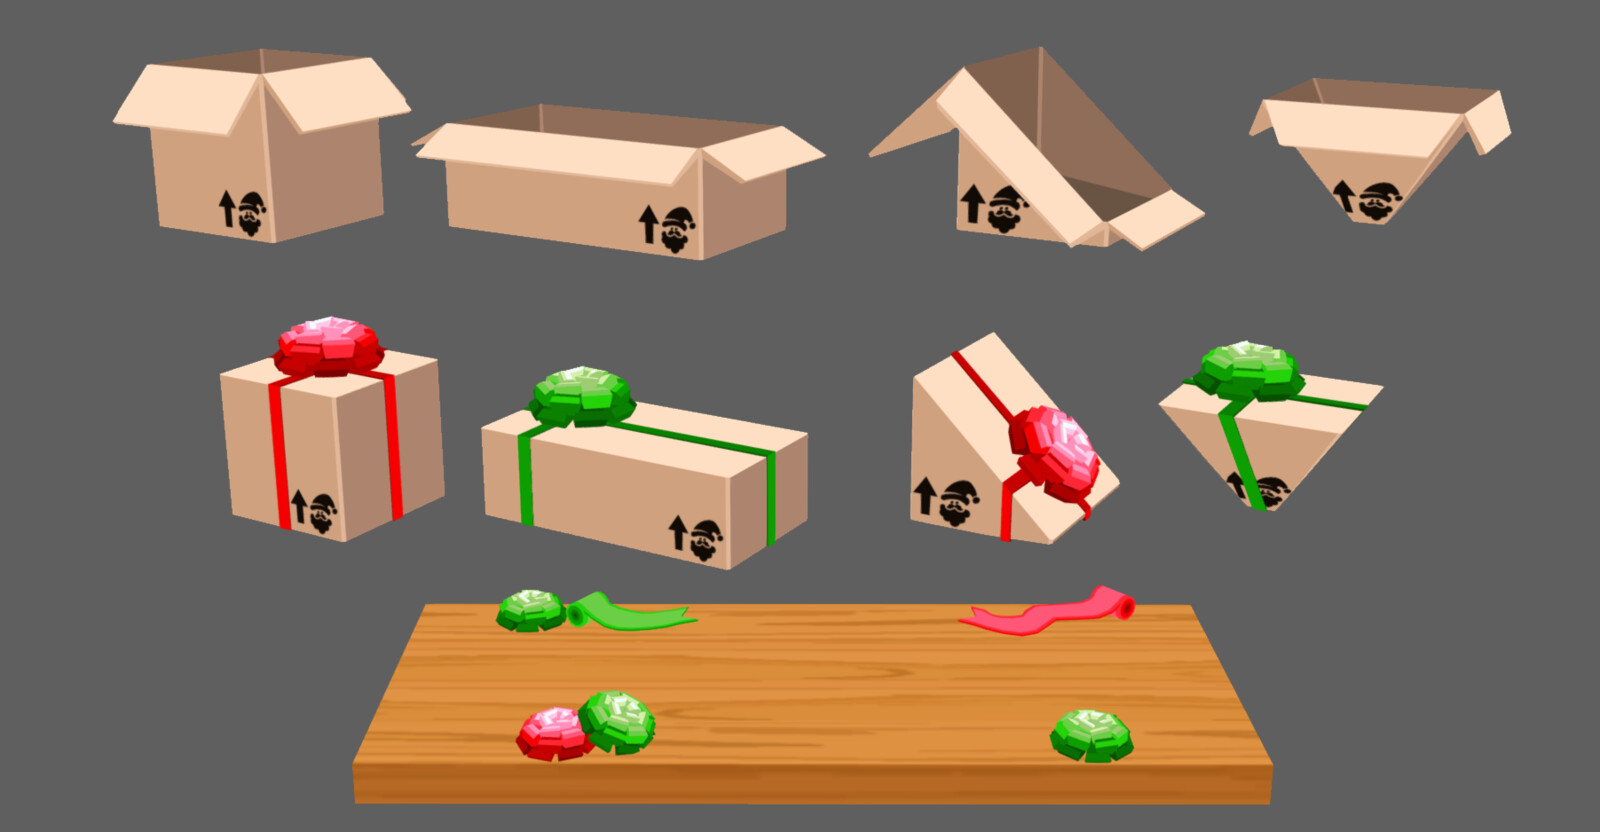 All the weird shaped boxes (to make it more fun and increase the difficulty)